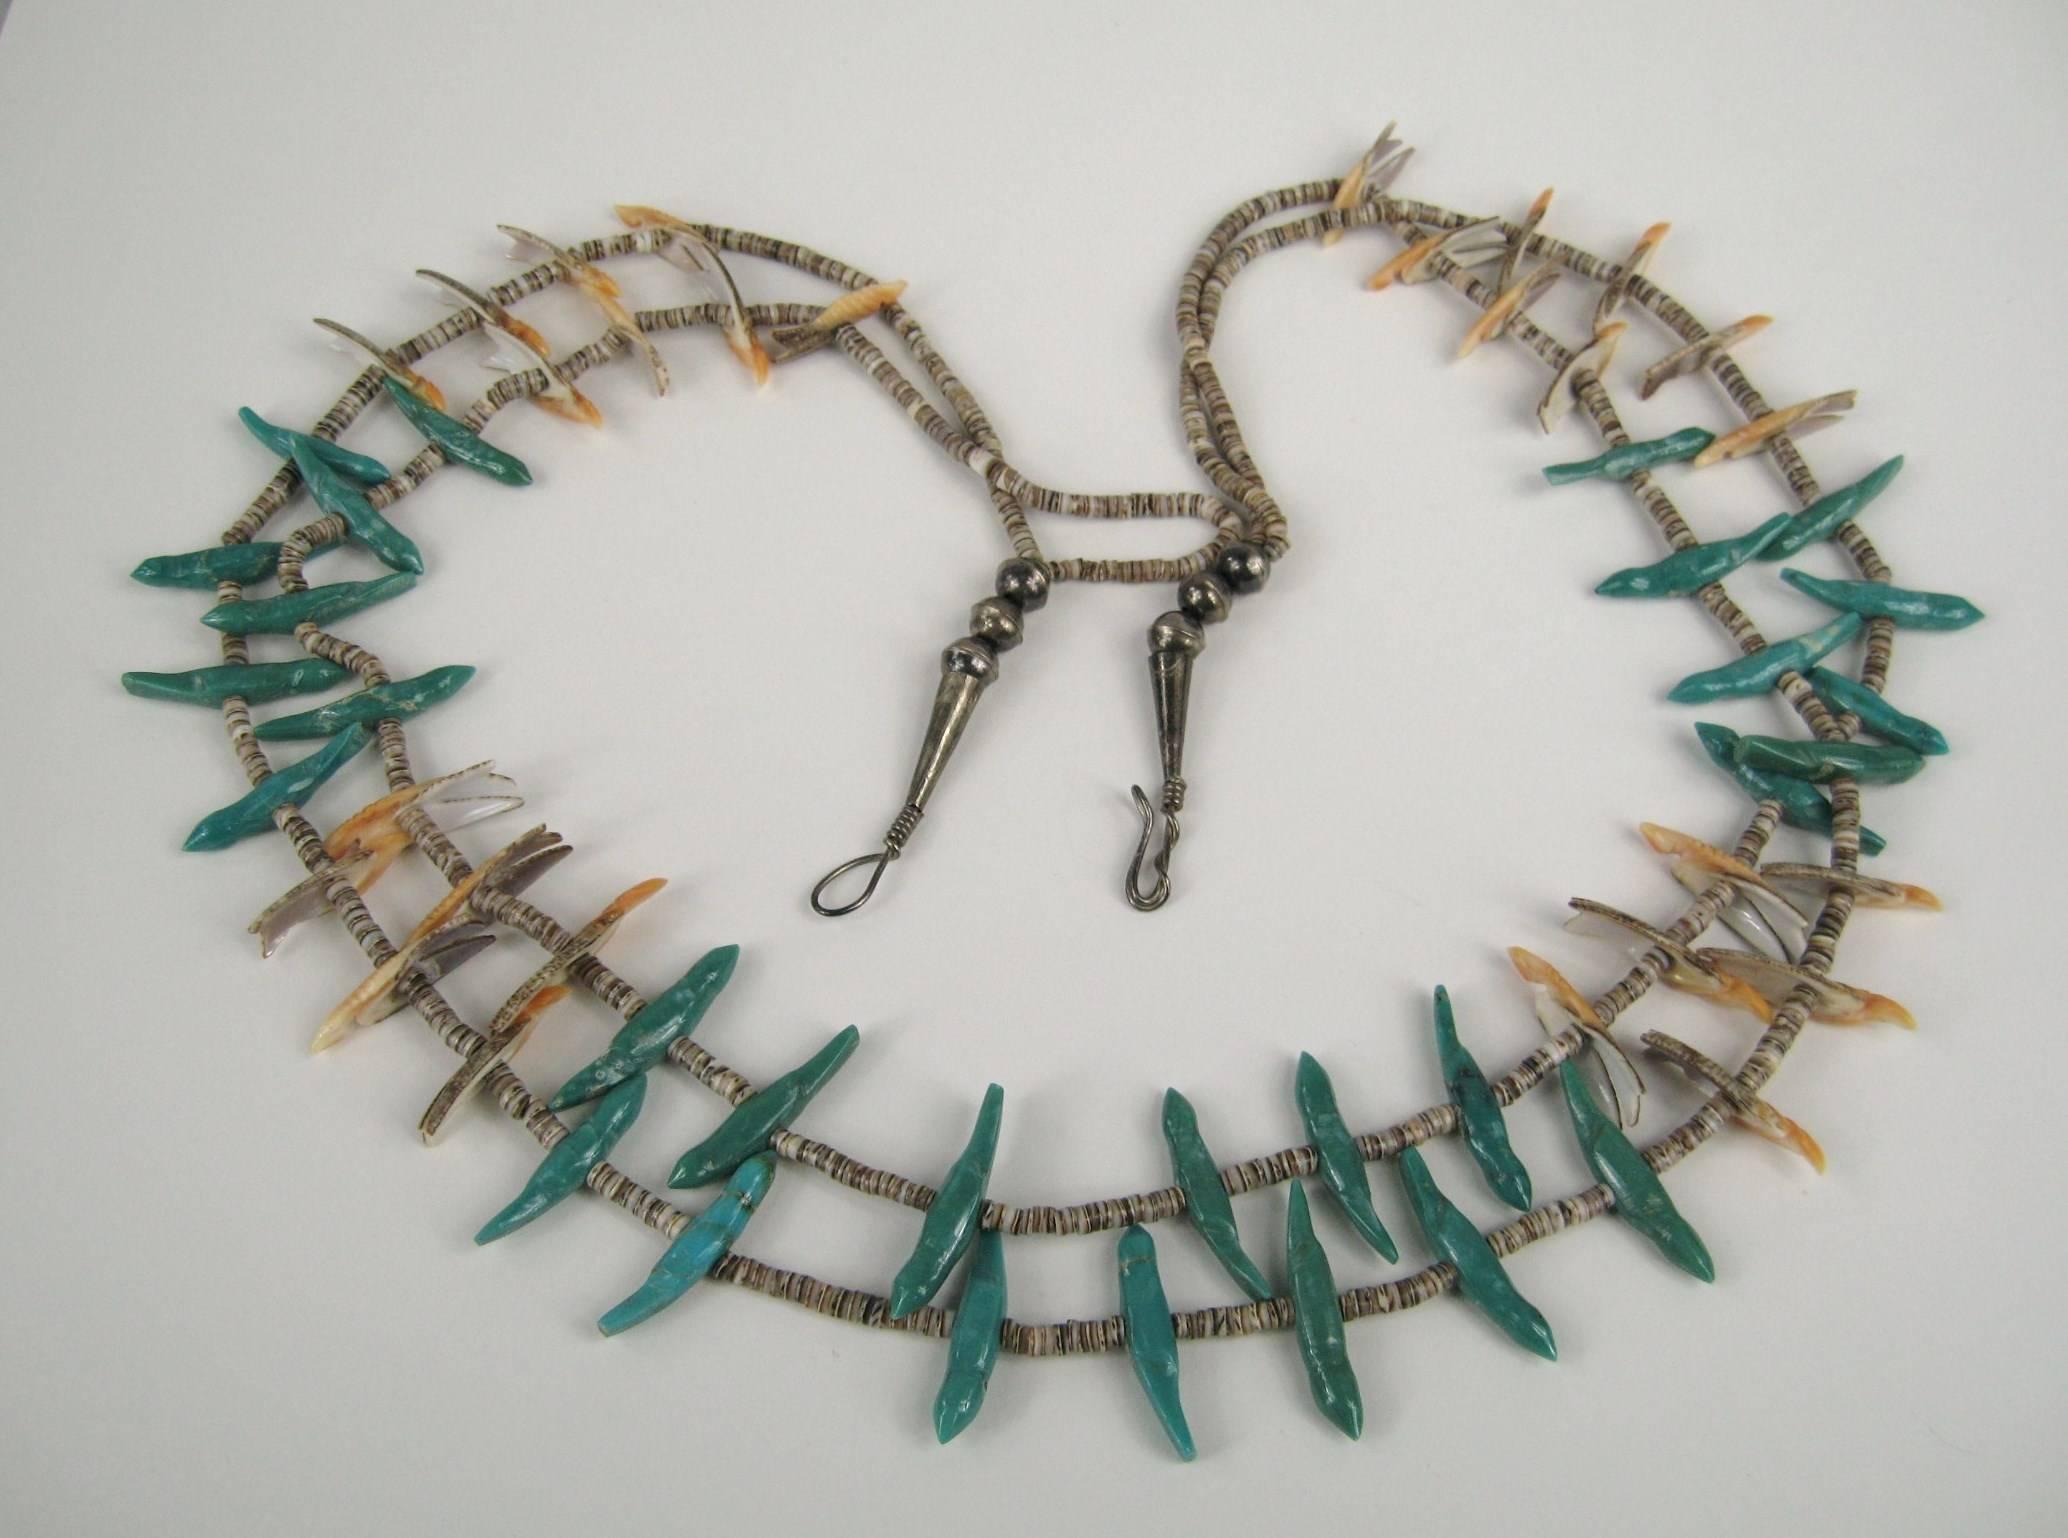 Necklace with 2 Strands of Unique Shell & Turquoise Bird Fetishes
Each Hand Carved 
Strung with Turquoise and Exotic Shell Heishi Beads

Hook Closure 
Measures
34